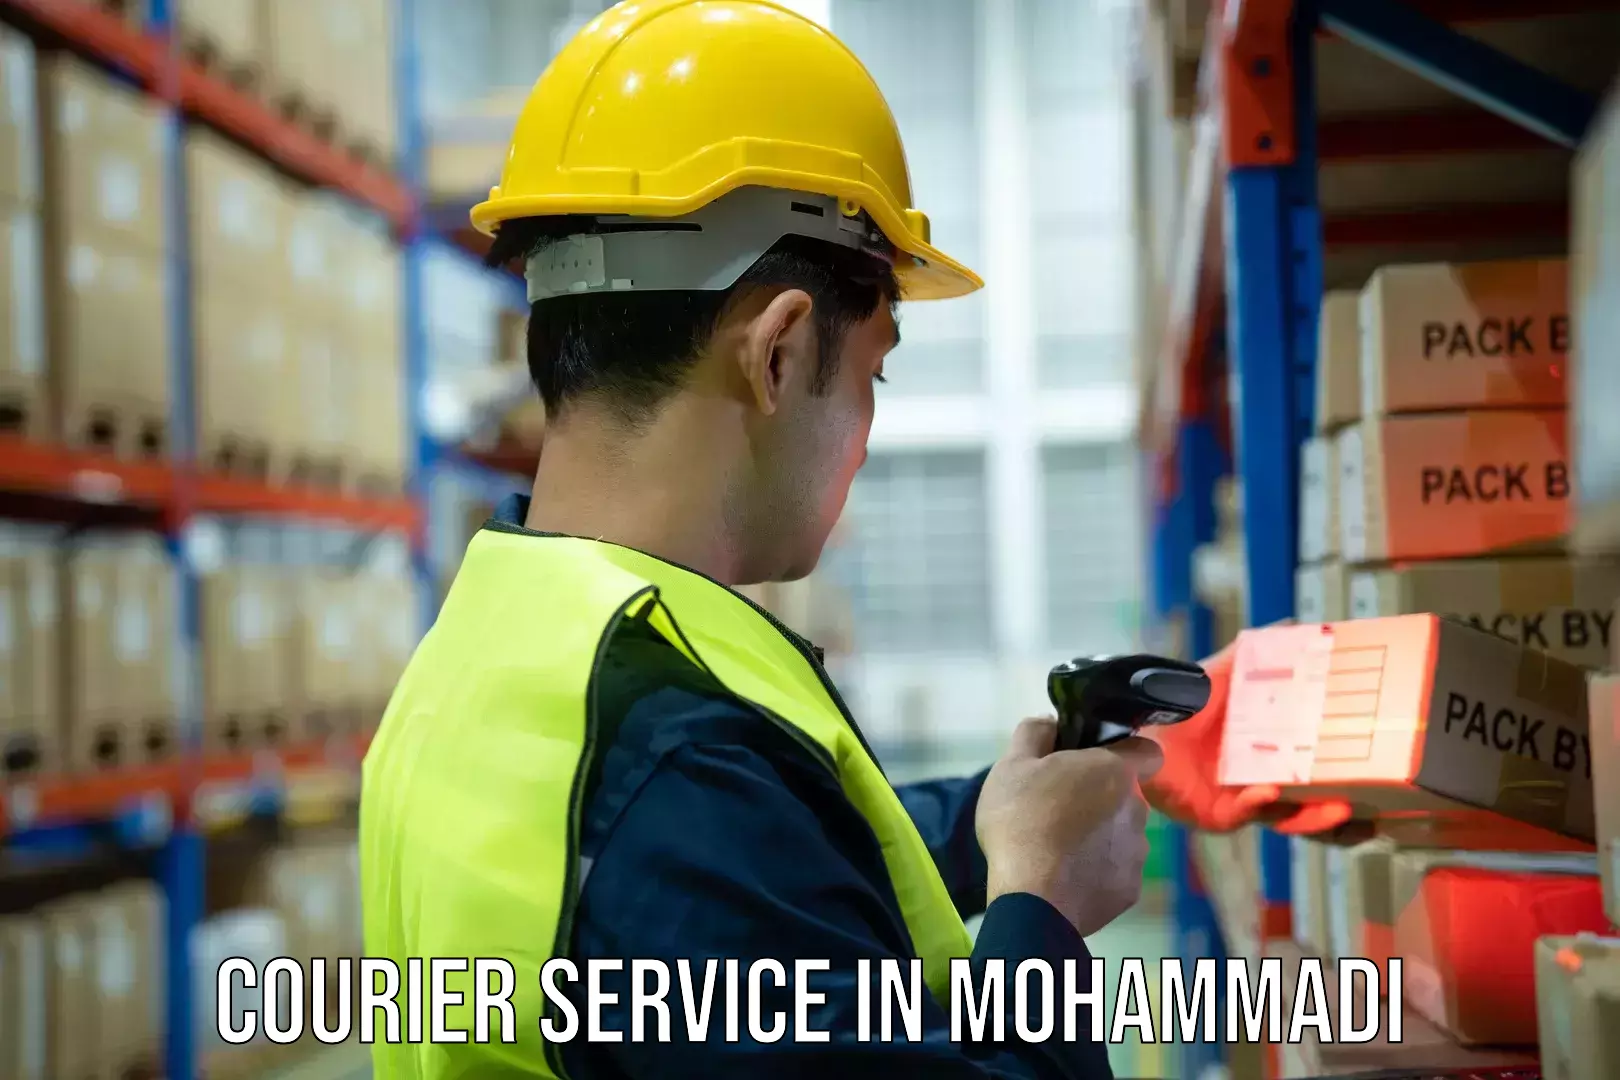 Flexible delivery schedules in Mohammadi